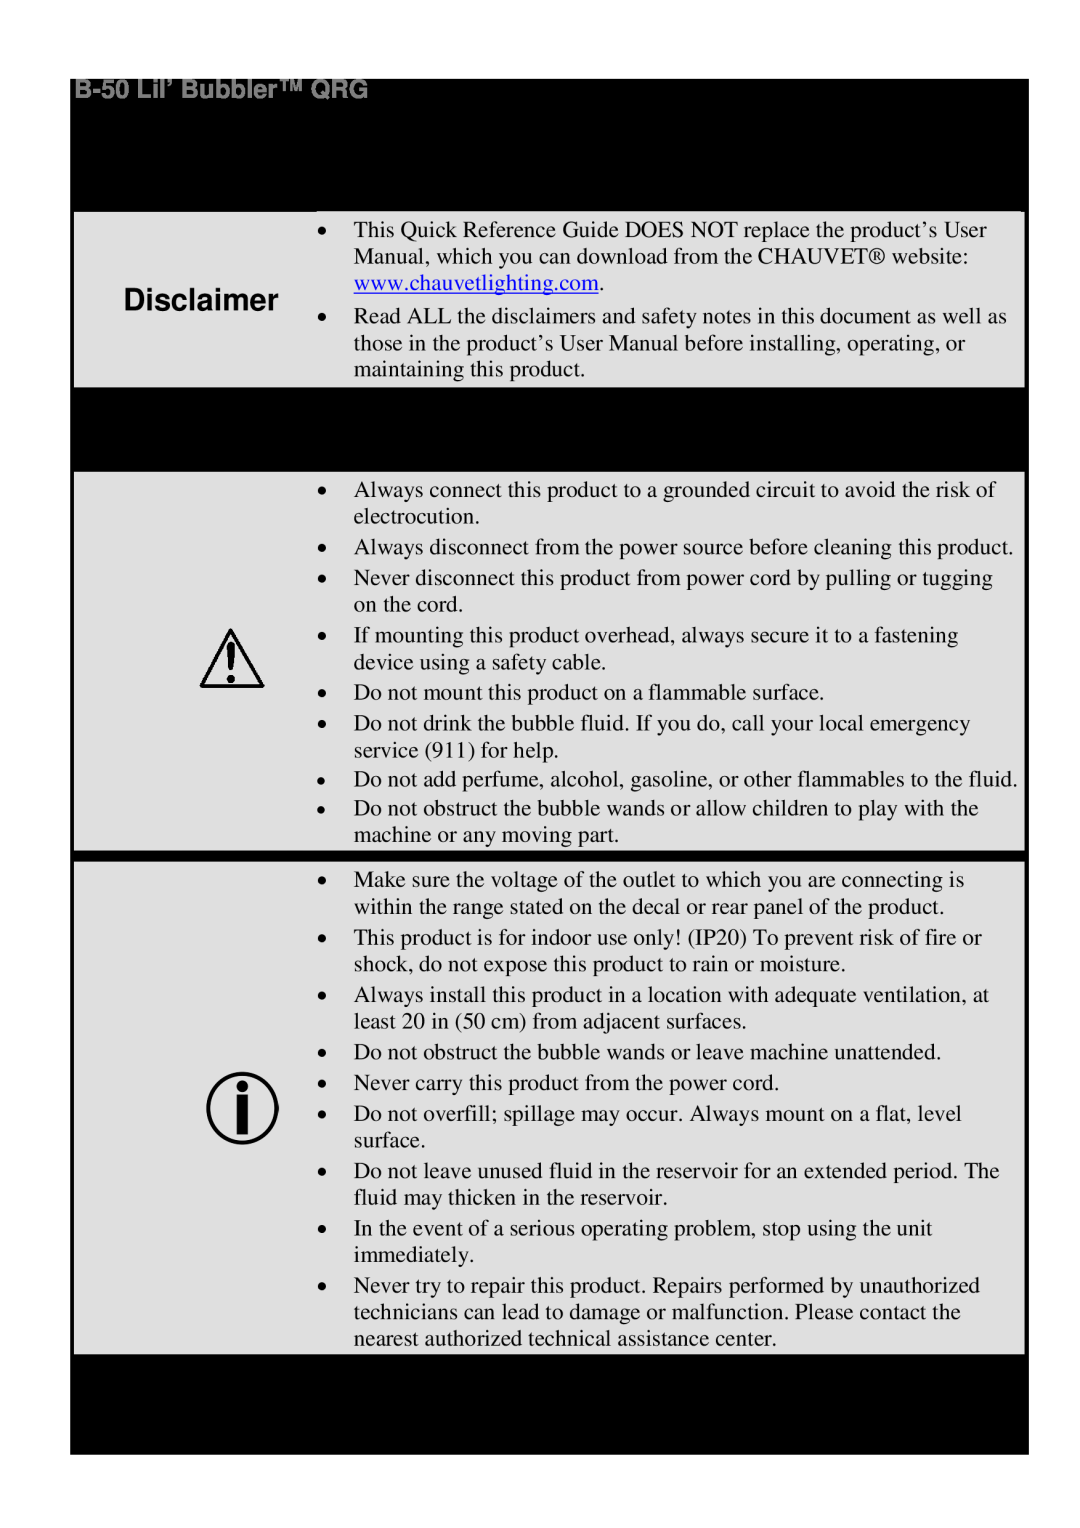 Chauvet b50 manual About This Guide Disclaimer, Safety Notes, B-50 Lil’ Bubbler QRG 